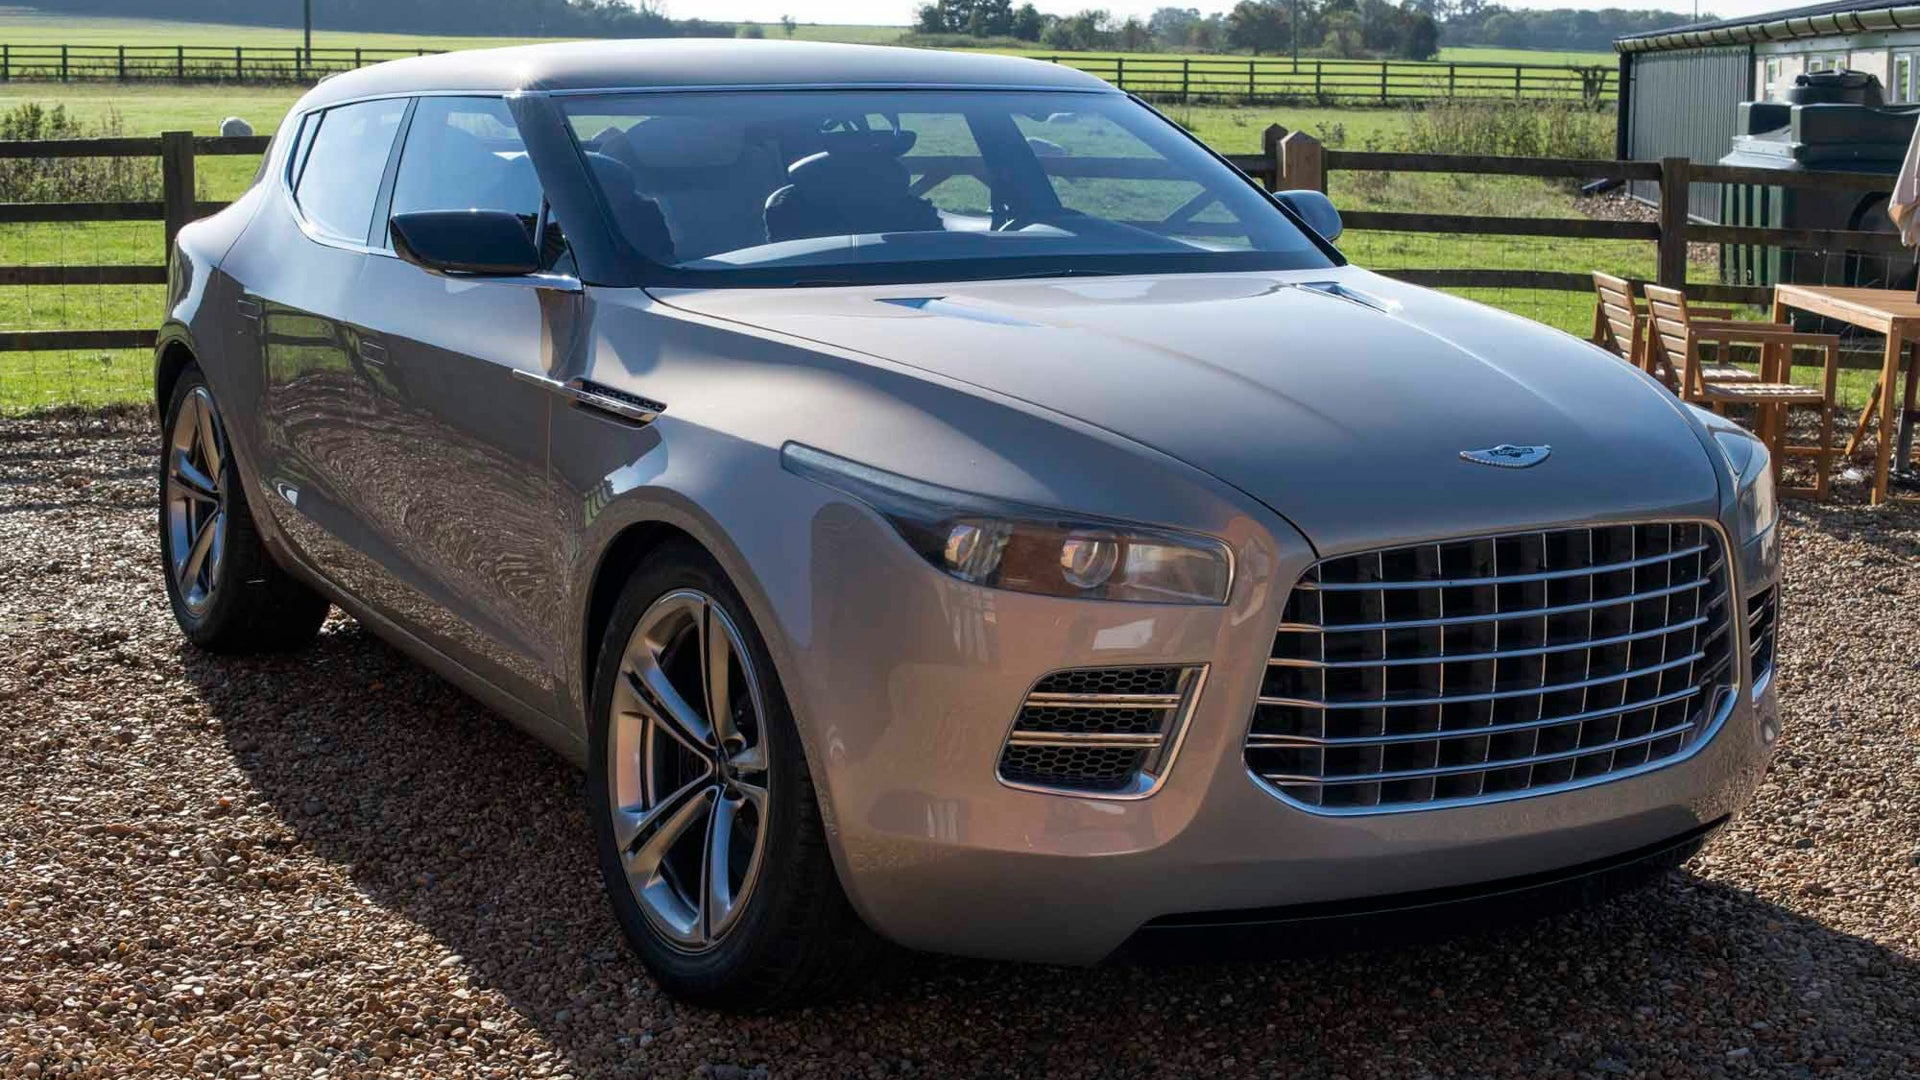 The V12 Aston Martin Lagonda SUV is a unique concept that could be yours